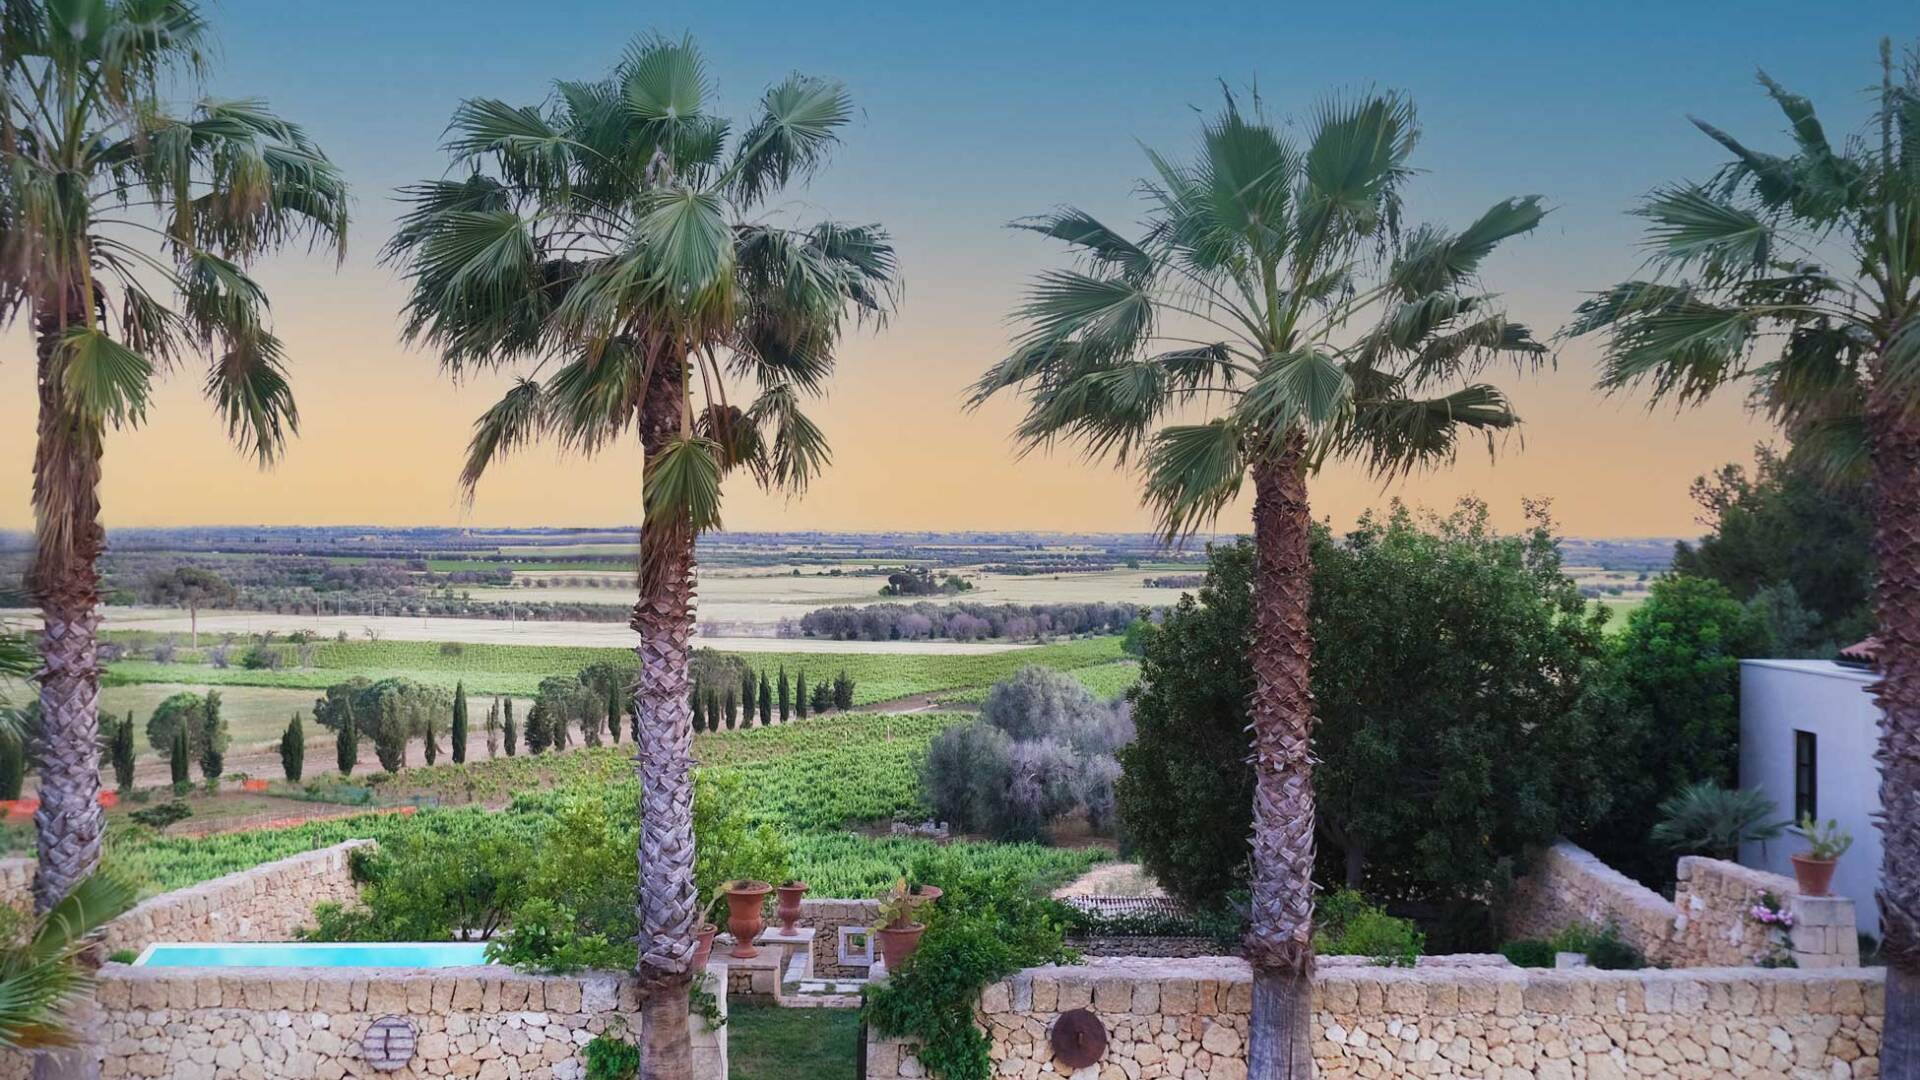 Rivo, view over the Apulian countryside